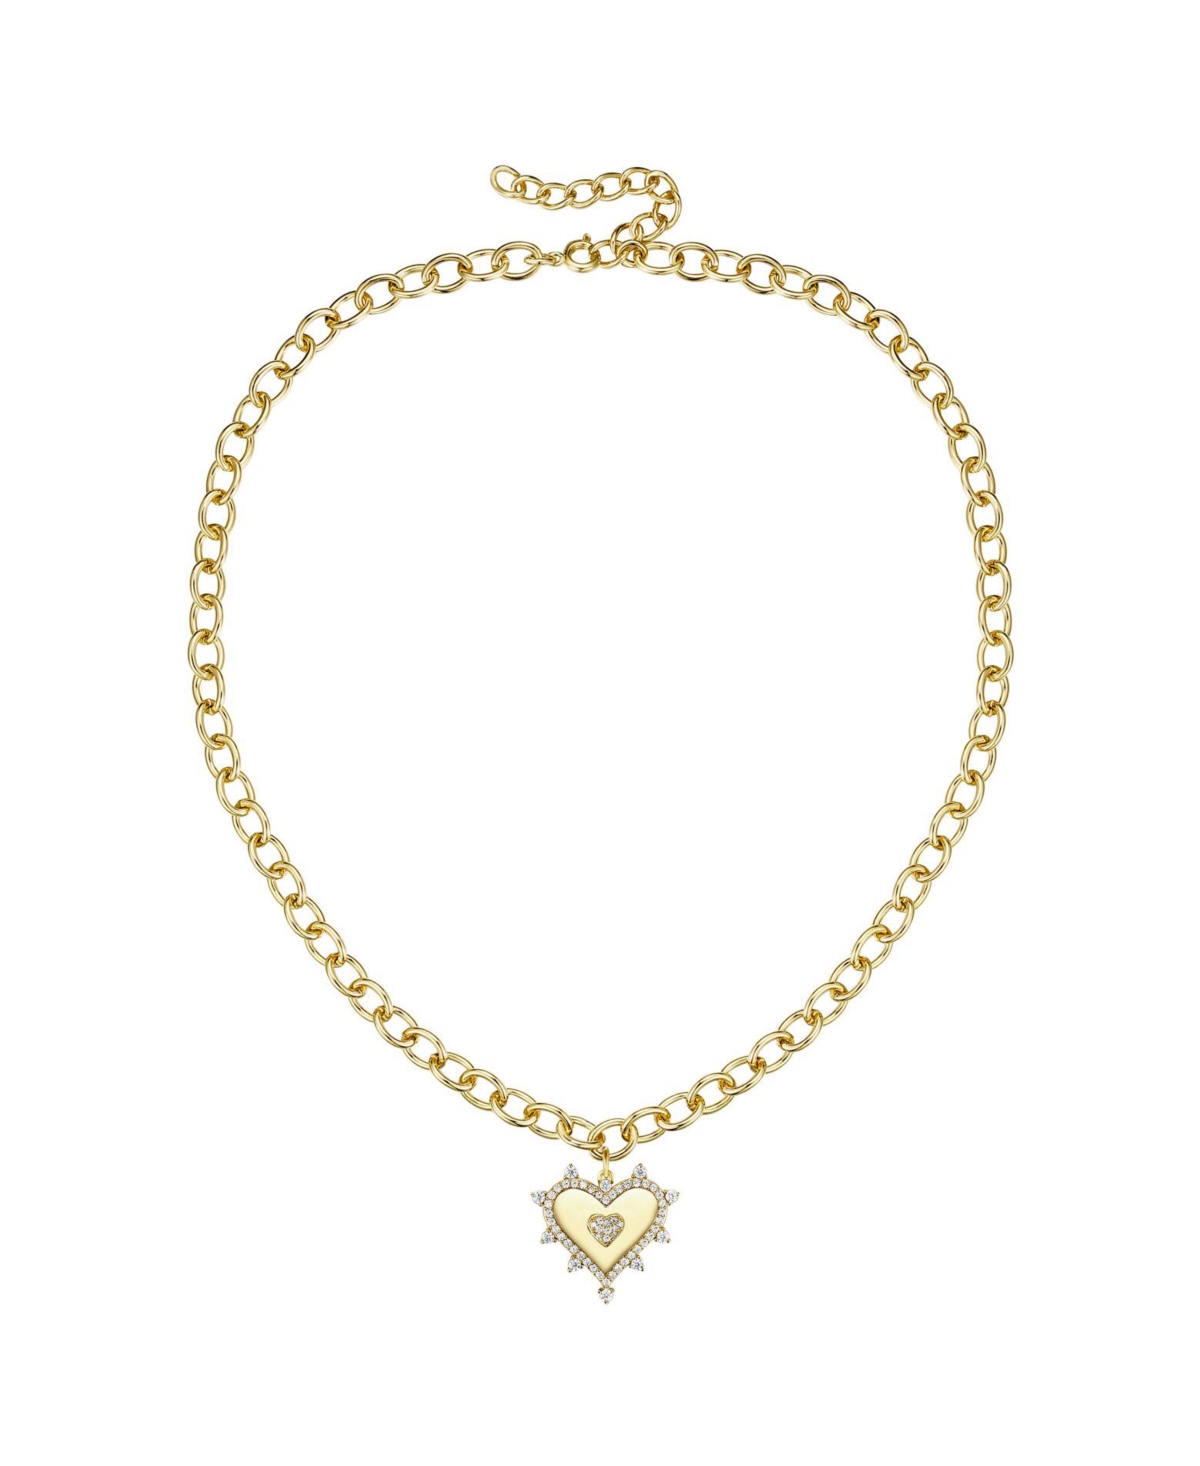 RACHEL GLAUBER 14K GOLD PLATED WITH CUBIC ZIRCONIA SUNSHINE HEART PENDANT CURB CHAIN ADJUSTABLE NECKLACE